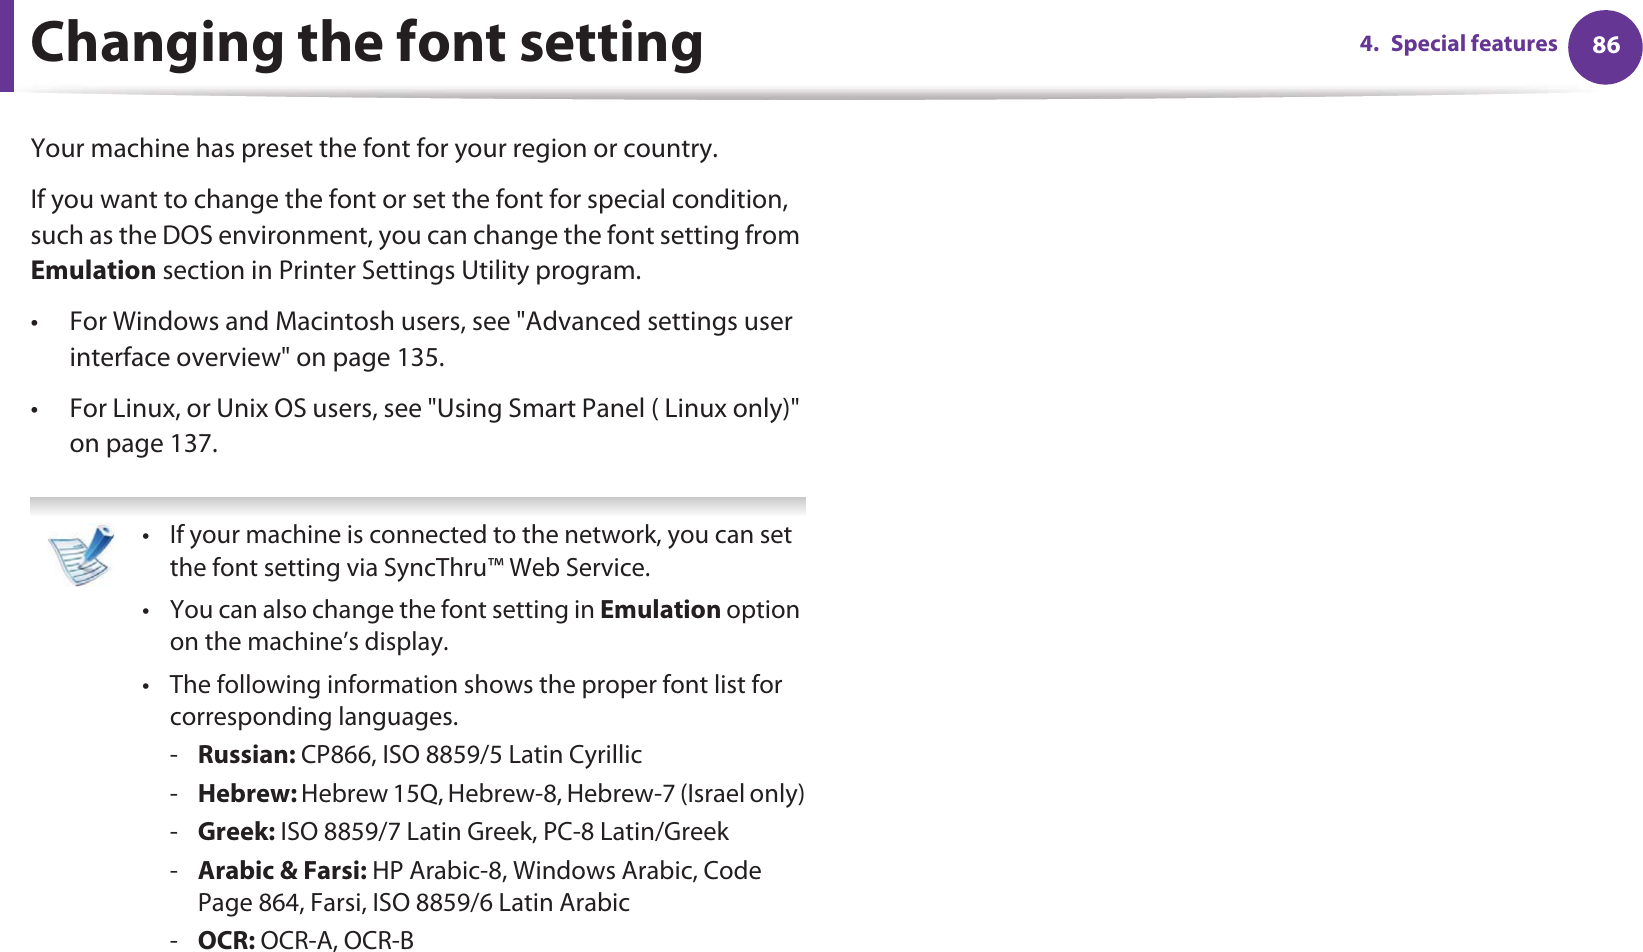 864. Special featuresChanging the font settingYour machine has preset the font for your region or country.If you want to change the font or set the font for special condition, such as the DOS environment, you can change the font setting from Emulation section in Printer Settings Utility program.• For Windows and Macintosh users, see &quot;Advanced settings user interface overview&quot; on page 135.• For Linux, or Unix OS users, see &quot;Using Smart Panel ( Linux only)&quot; on page 137. • If your machine is connected to the network, you can set the font setting via SyncThru™ Web Service.• You can also change the font setting in Emulation option on the machine’s display.• The following information shows the proper font list for corresponding languages.-Russian: CP866, ISO 8859/5 Latin Cyrillic-Hebrew: Hebrew 15Q, Hebrew-8, Hebrew-7 (Israel only)-Greek: ISO 8859/7 Latin Greek, PC-8 Latin/Greek-Arabic &amp; Farsi: HP Arabic-8, Windows Arabic, Code Page 864, Farsi, ISO 8859/6 Latin Arabic-OCR: OCR-A, OCR-B 